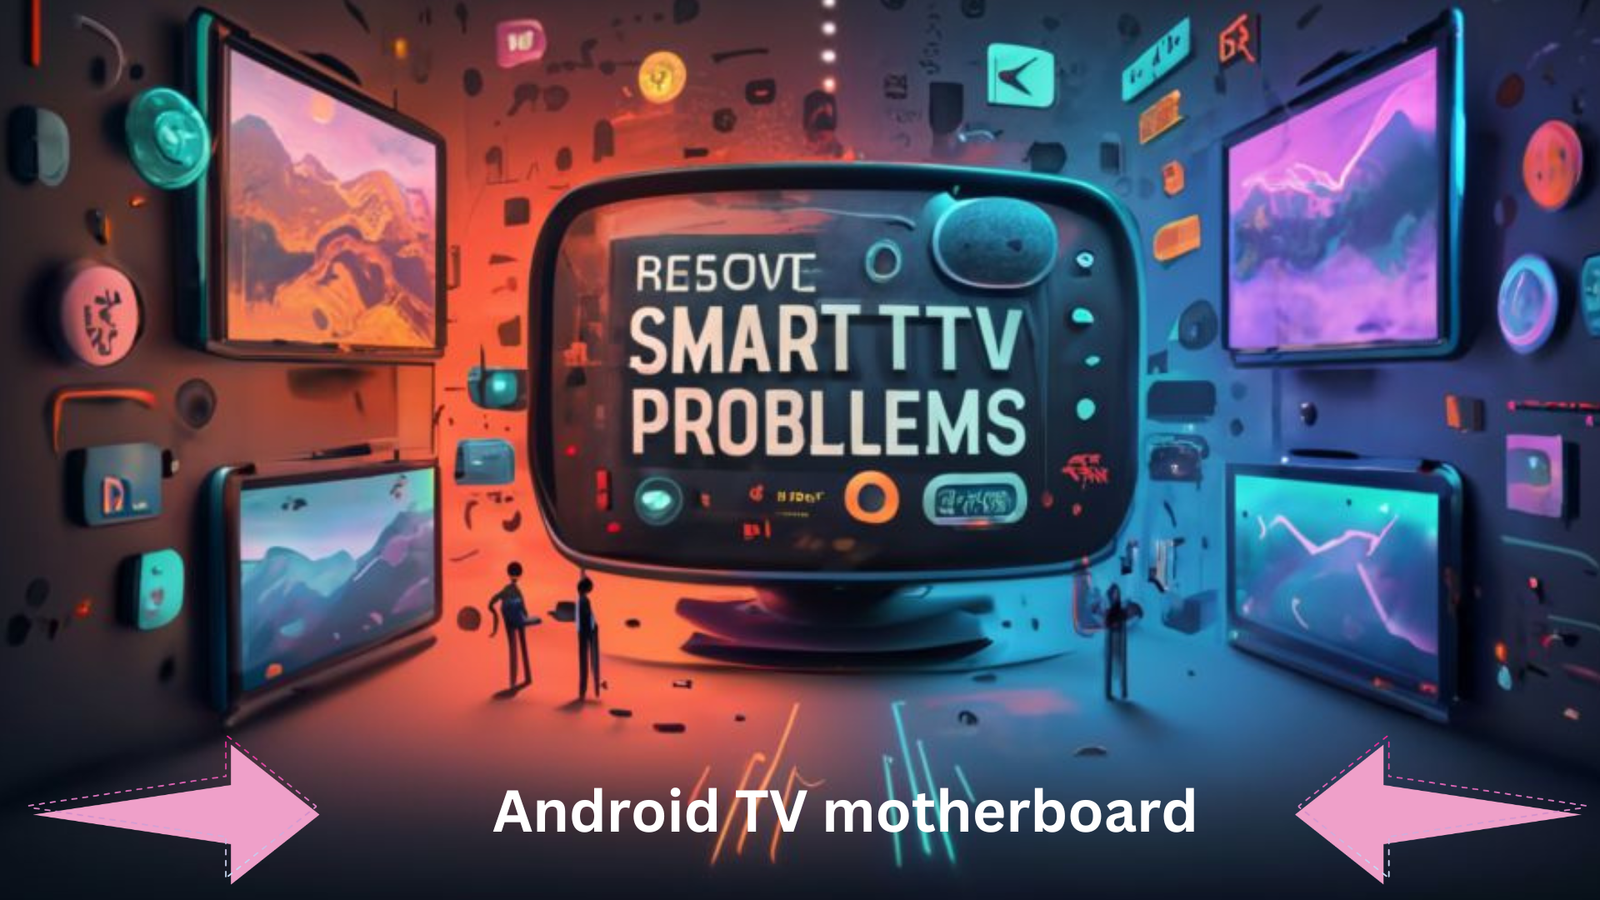 The #01 Ultimate Guide to Supercharging Your Android TV Motherboard Performance